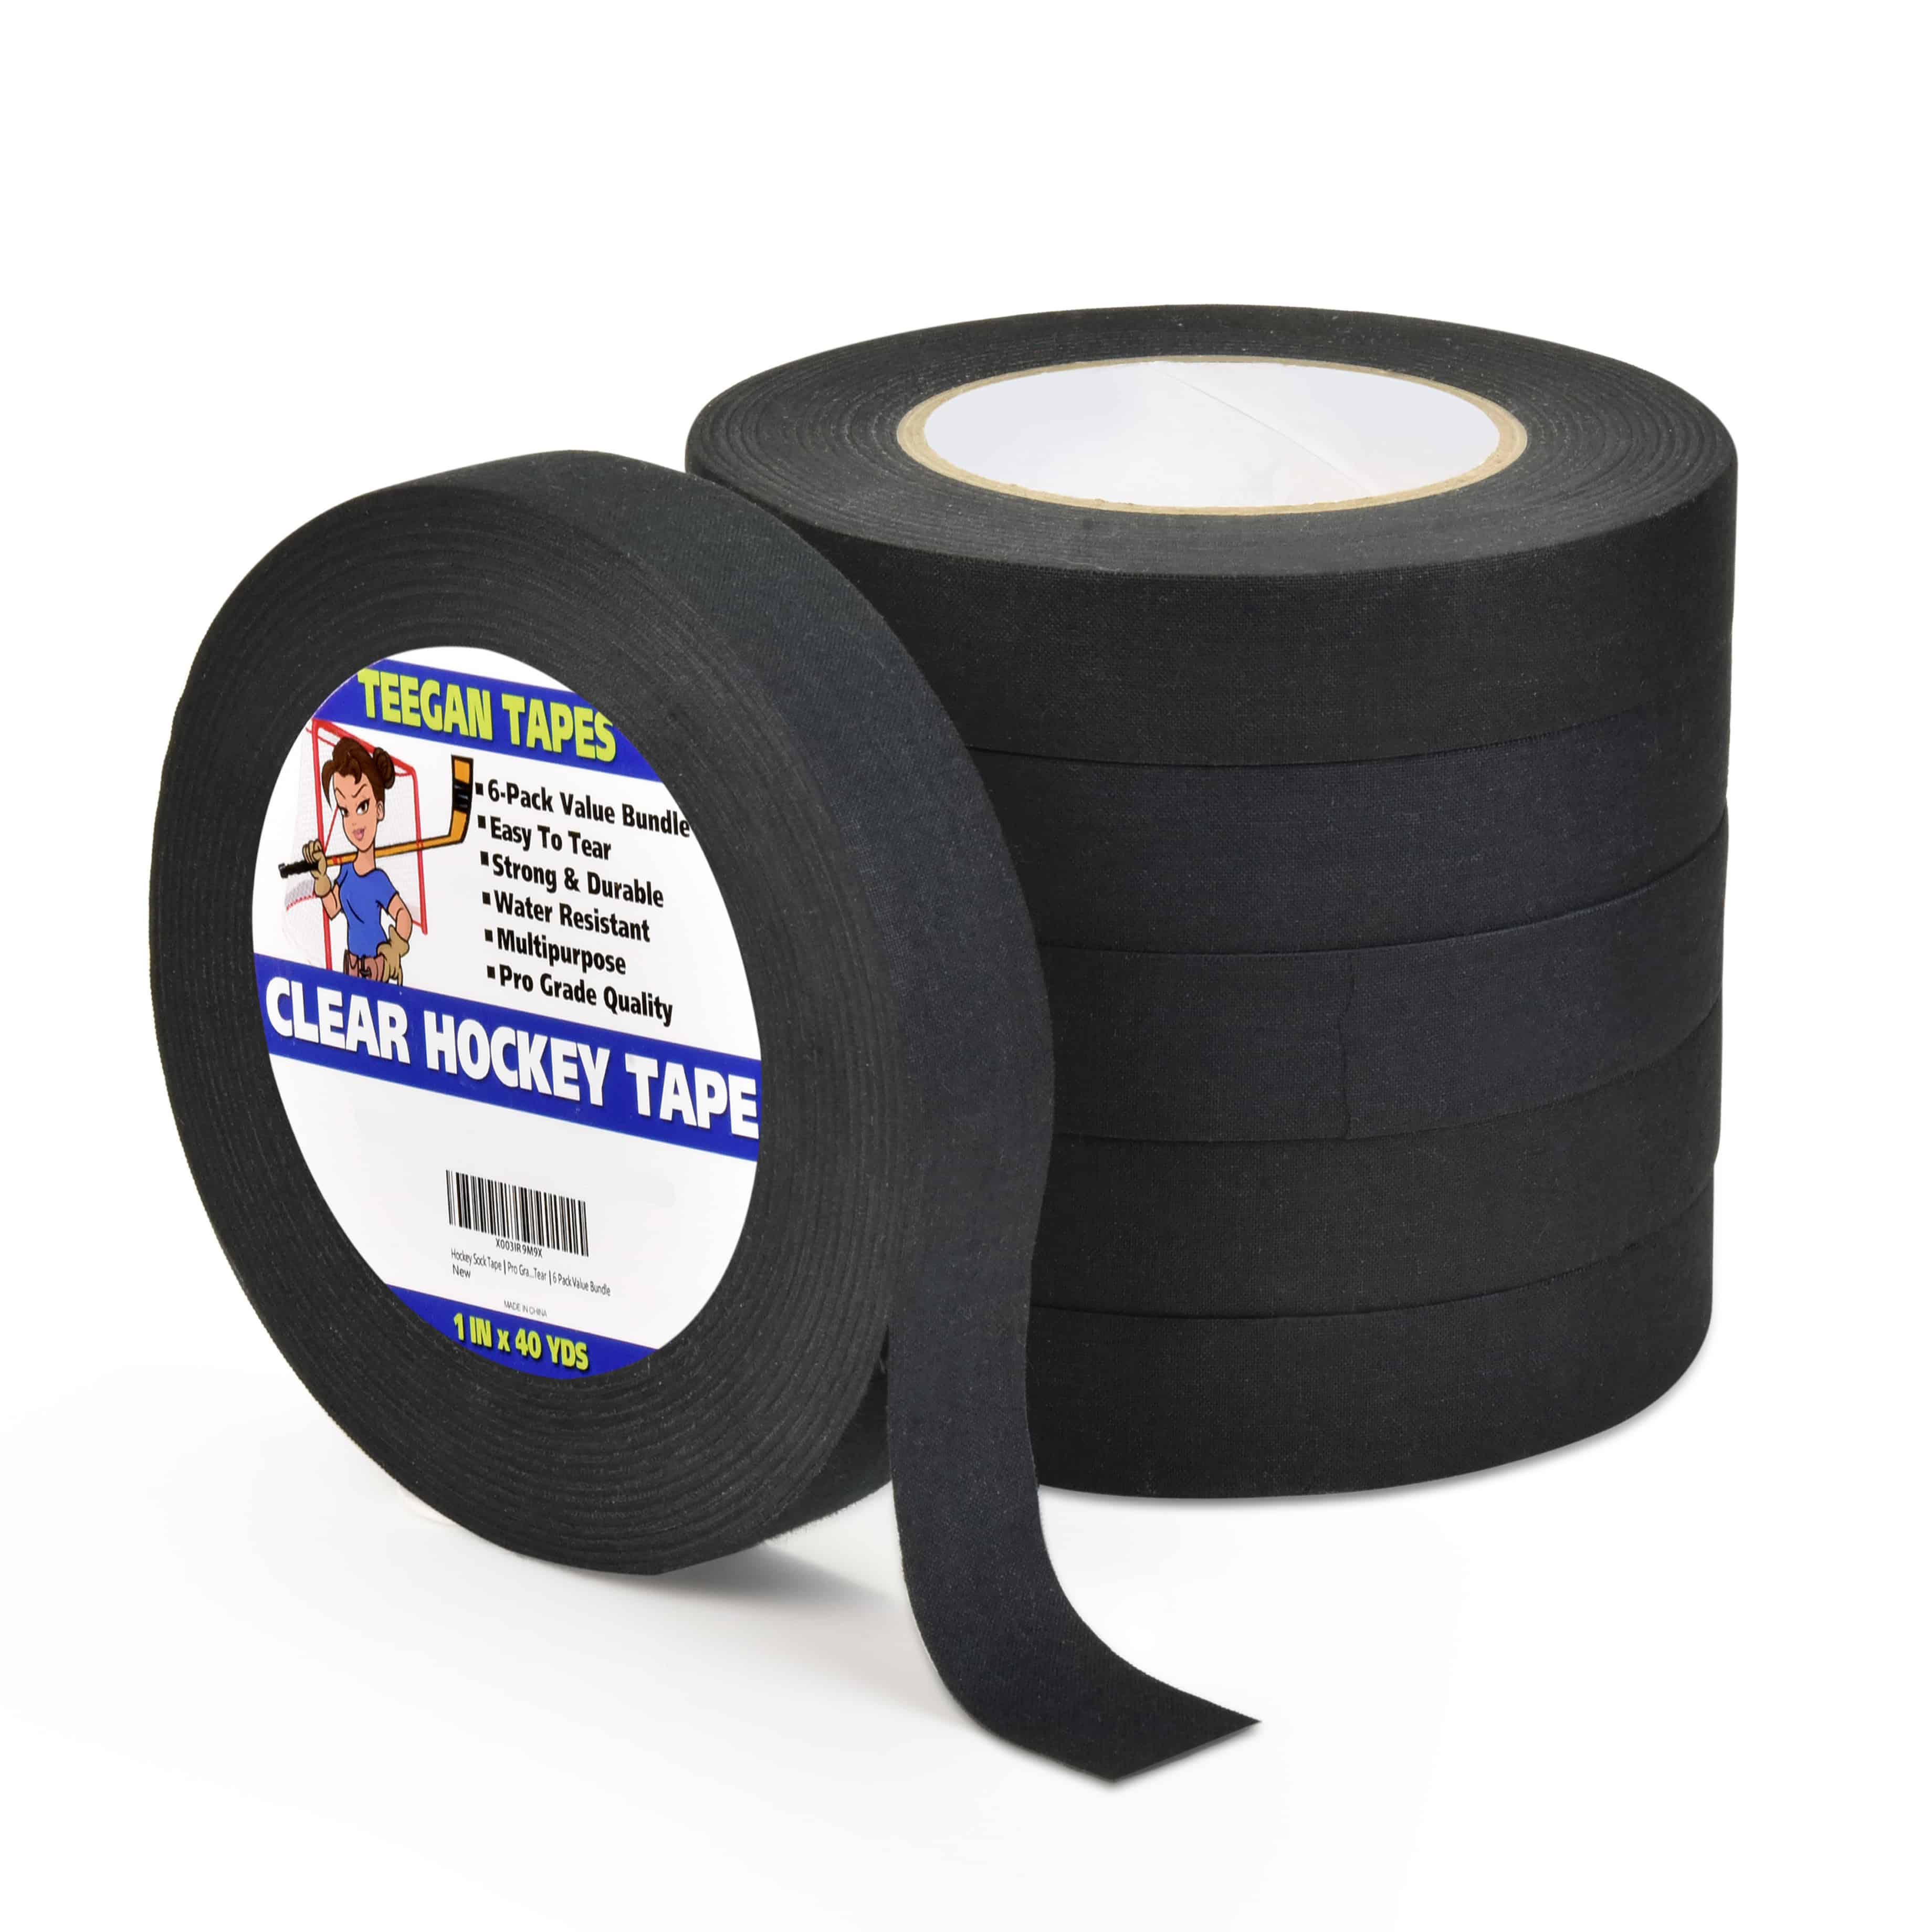 3M GT2 Premium Matte Cloth Black 1.88 in. x 164 ft. Non-Reflective  No-Residue Gaffer's Tape GT2 - The Home Depot